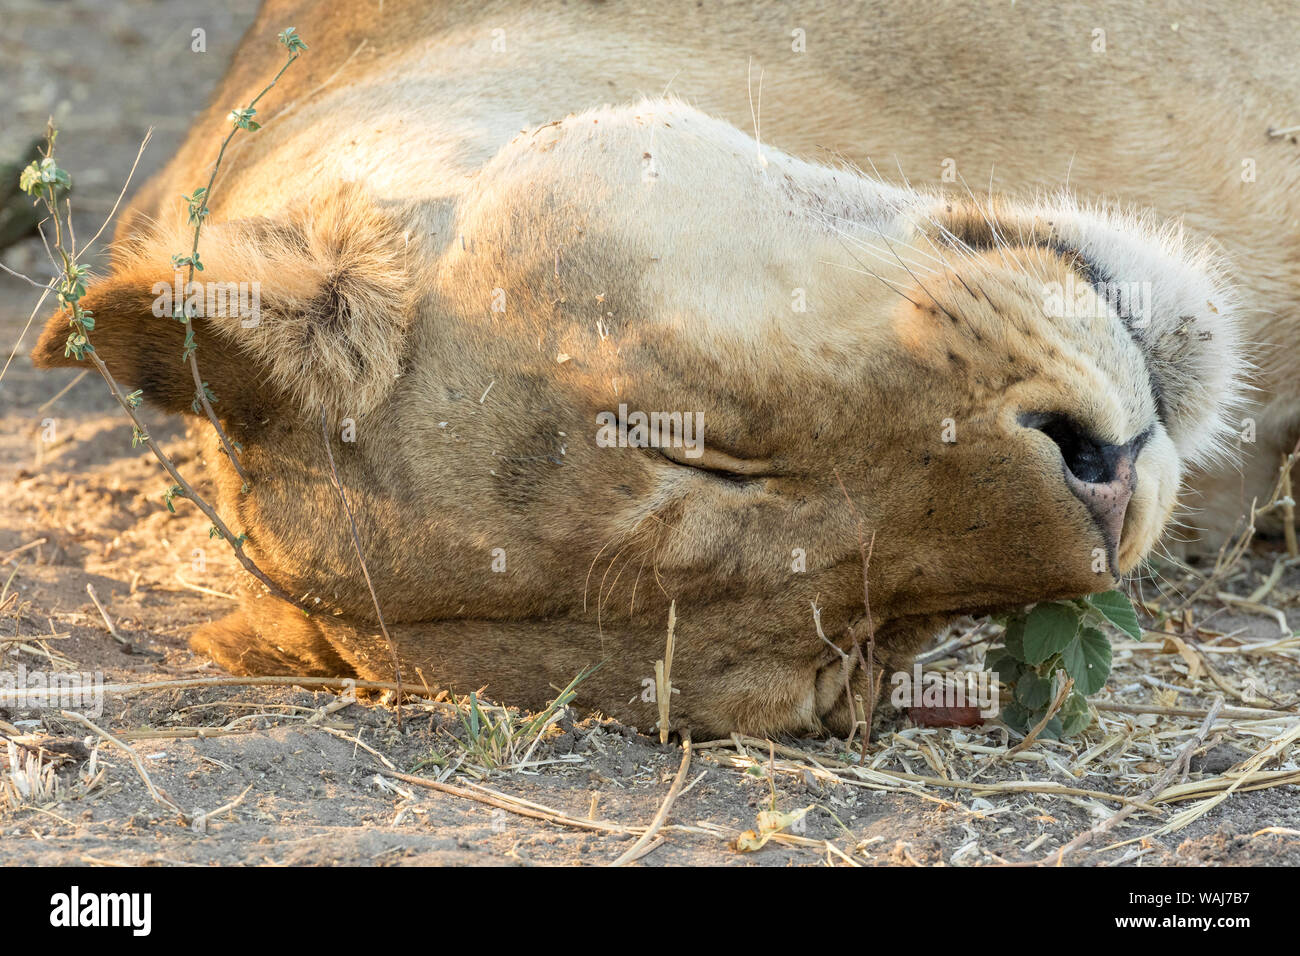 Africa, Botswana, Chobe National Park. Close-up of resting lioness. Credit as: Wendy Kaveney / Jaynes Gallery / DanitaDelimont.com Stock Photo